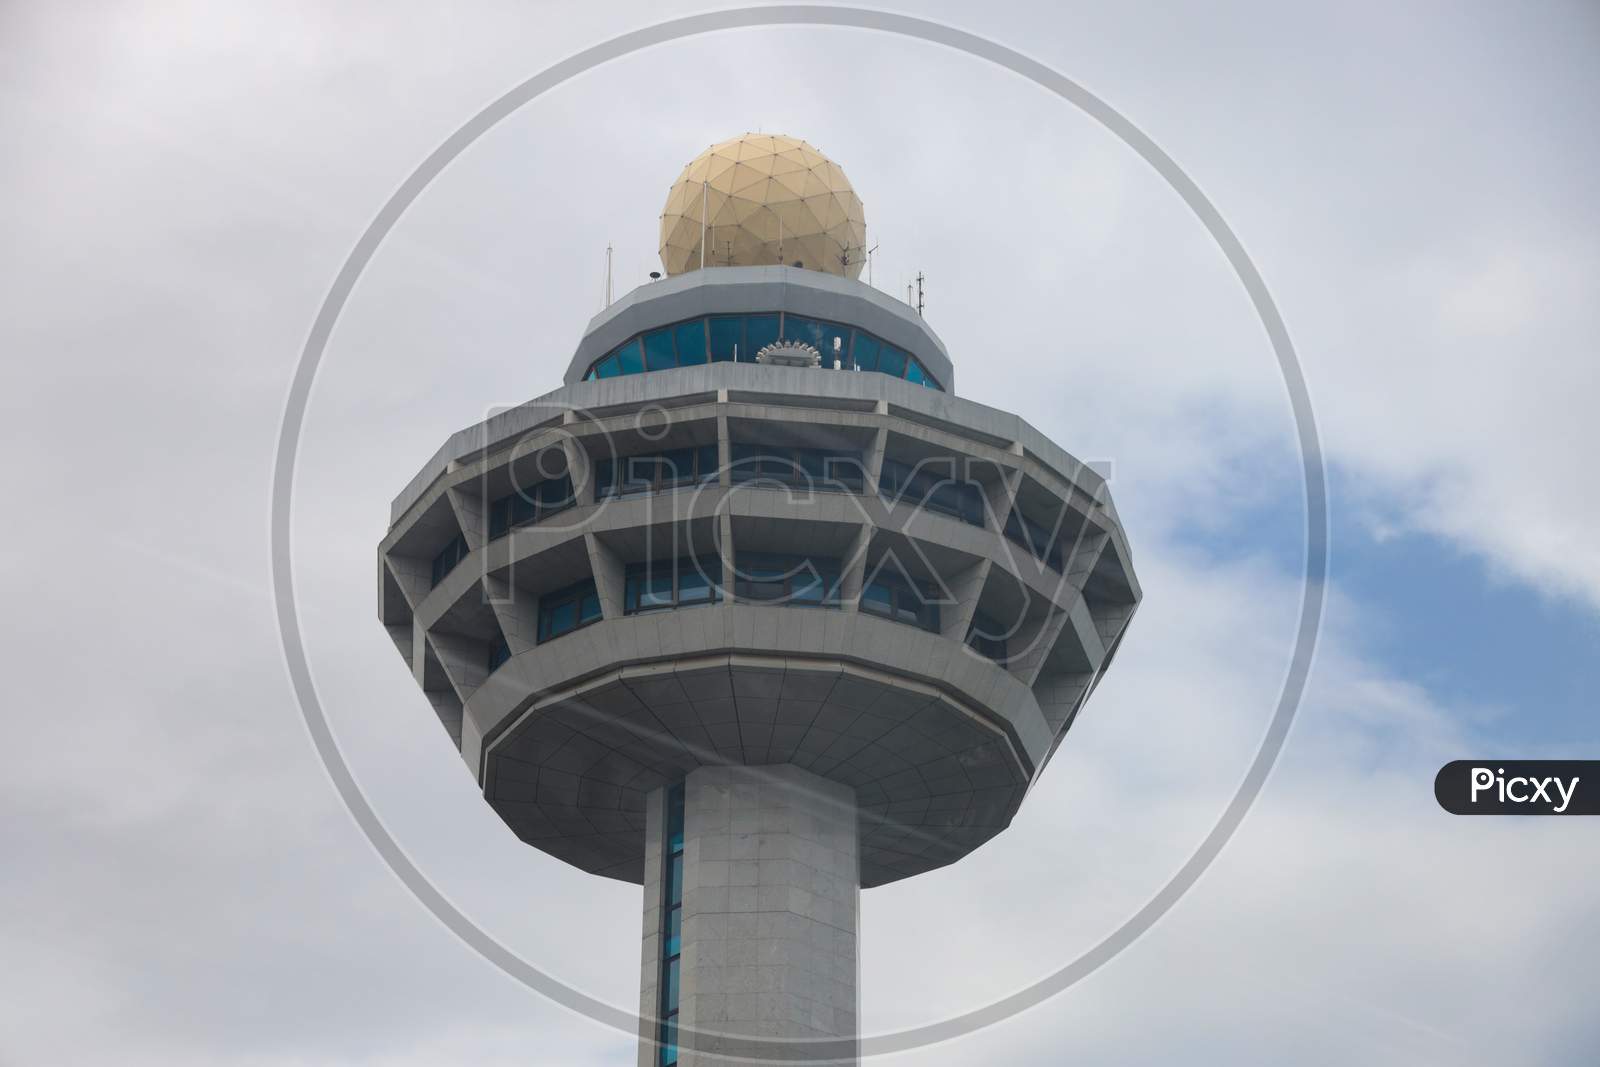 image-of-atc-tower-or-air-traffic-controller-tower-in-changi-airport-singapore-ns818653-picxy